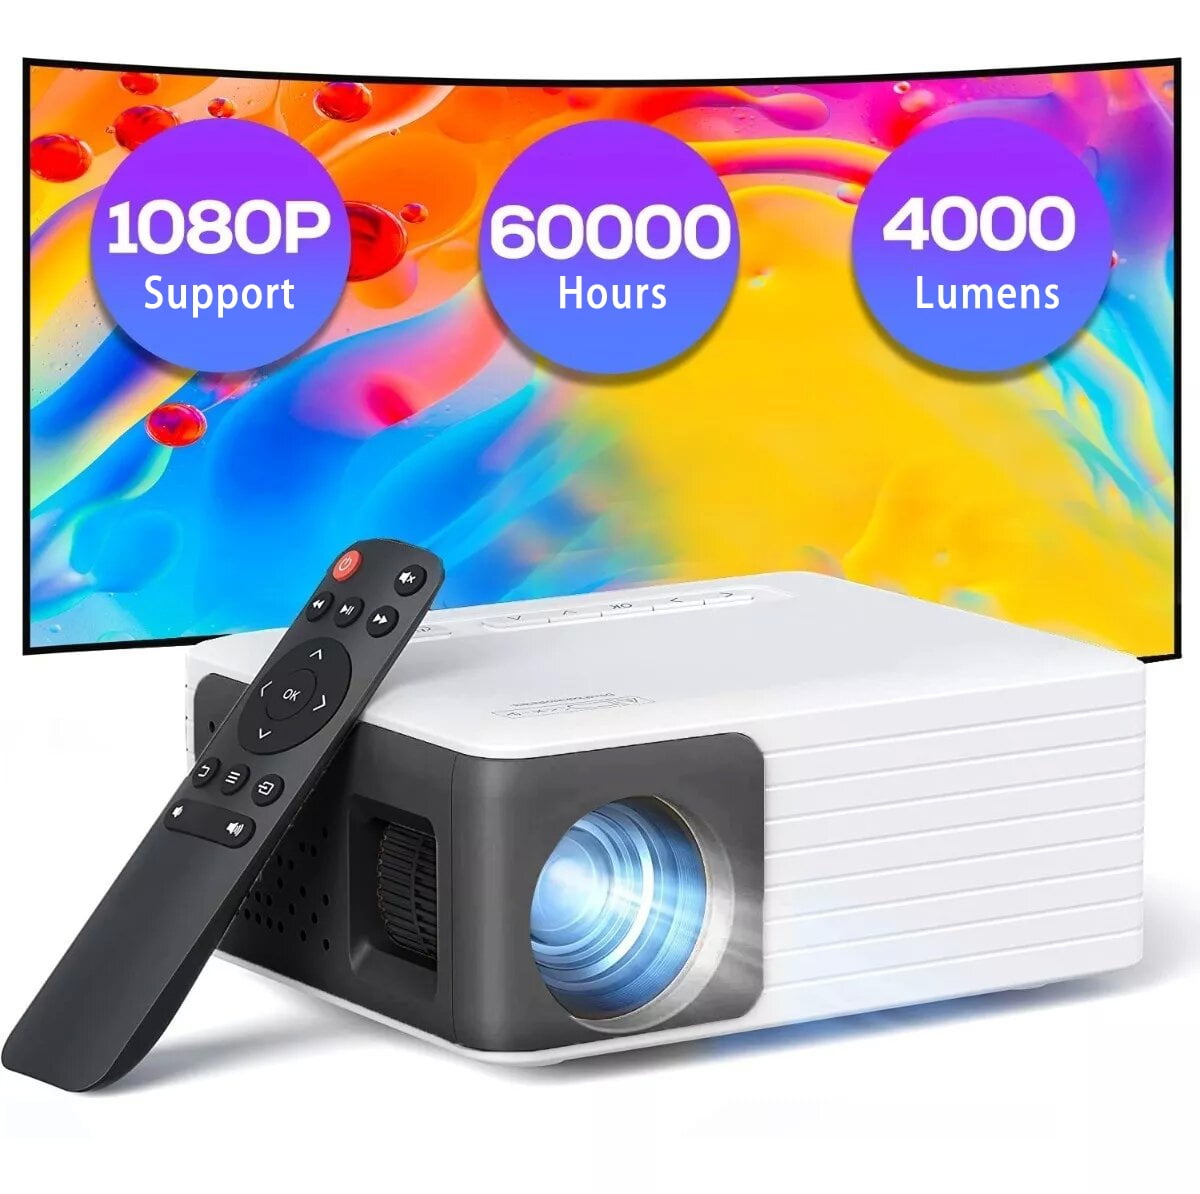 vandfald krystal Forinden YOTON Y3 Pro 1080P Support FHD Movie Projector, 100" Screen 4000Lumens Home  Theater, Compatible with PC/iOS /Android - Walmart.com